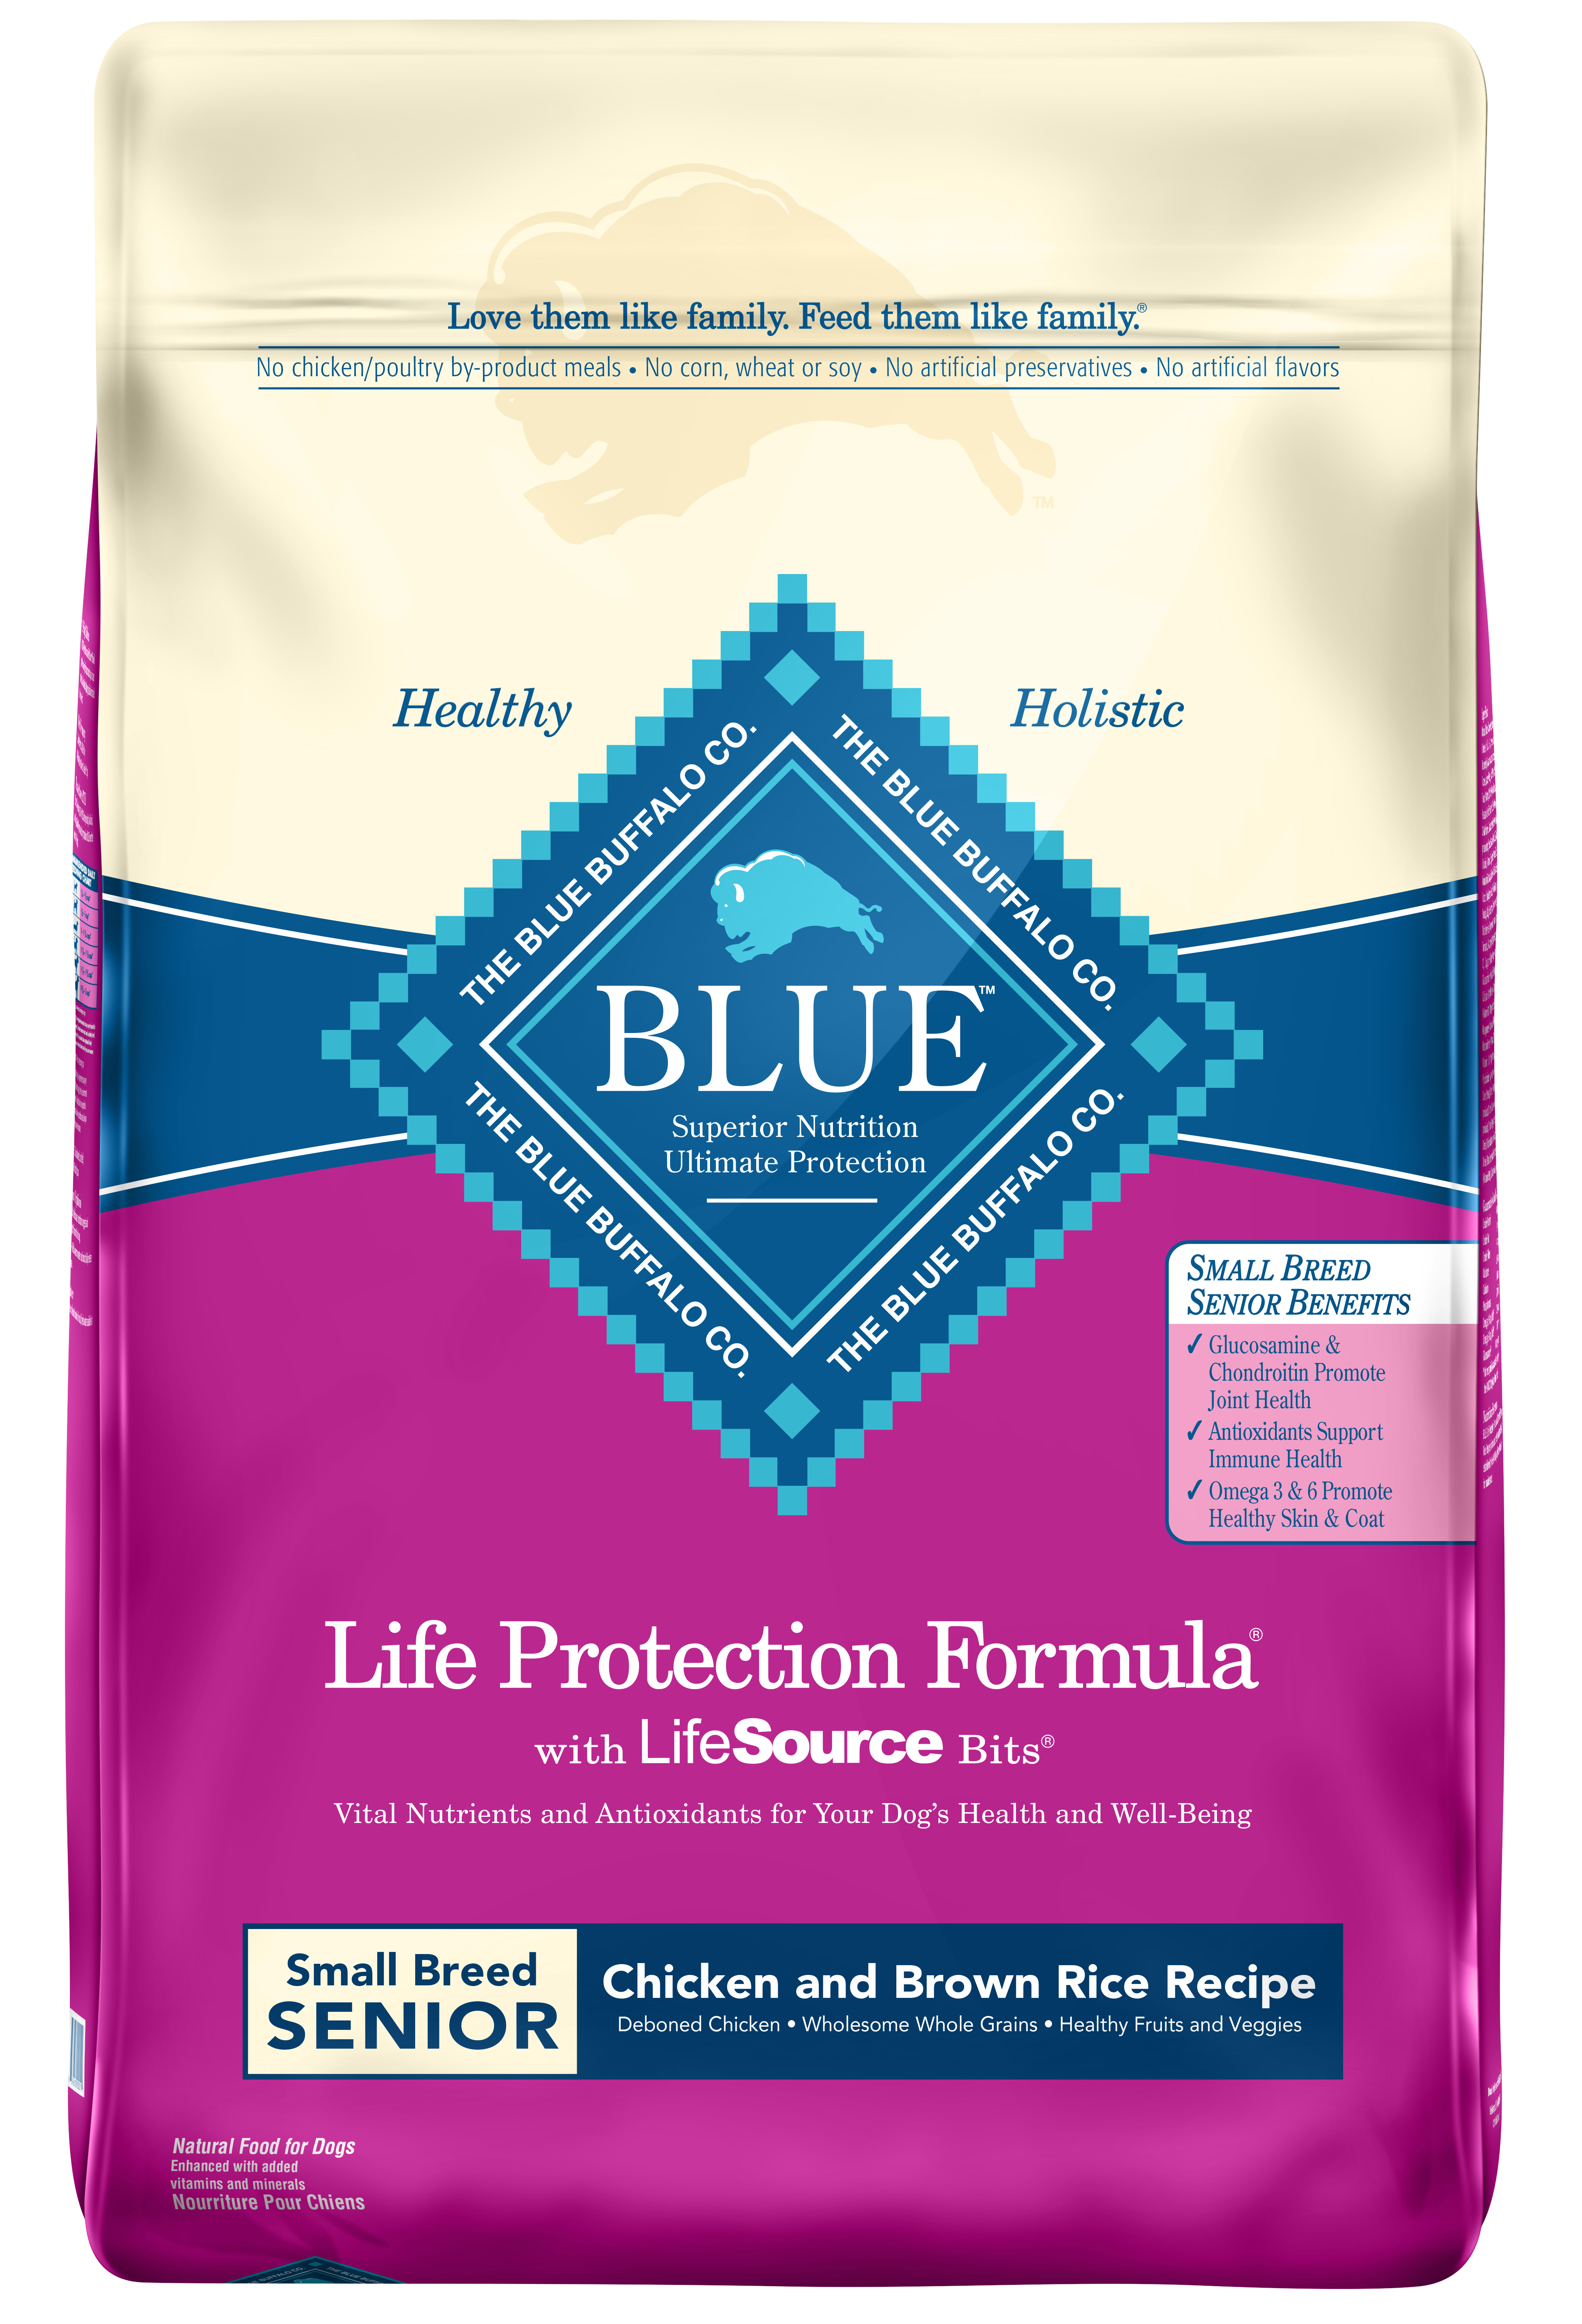 Blue Buffalo Life Protection Formula Chicken and Brown Rice Recipe For Small